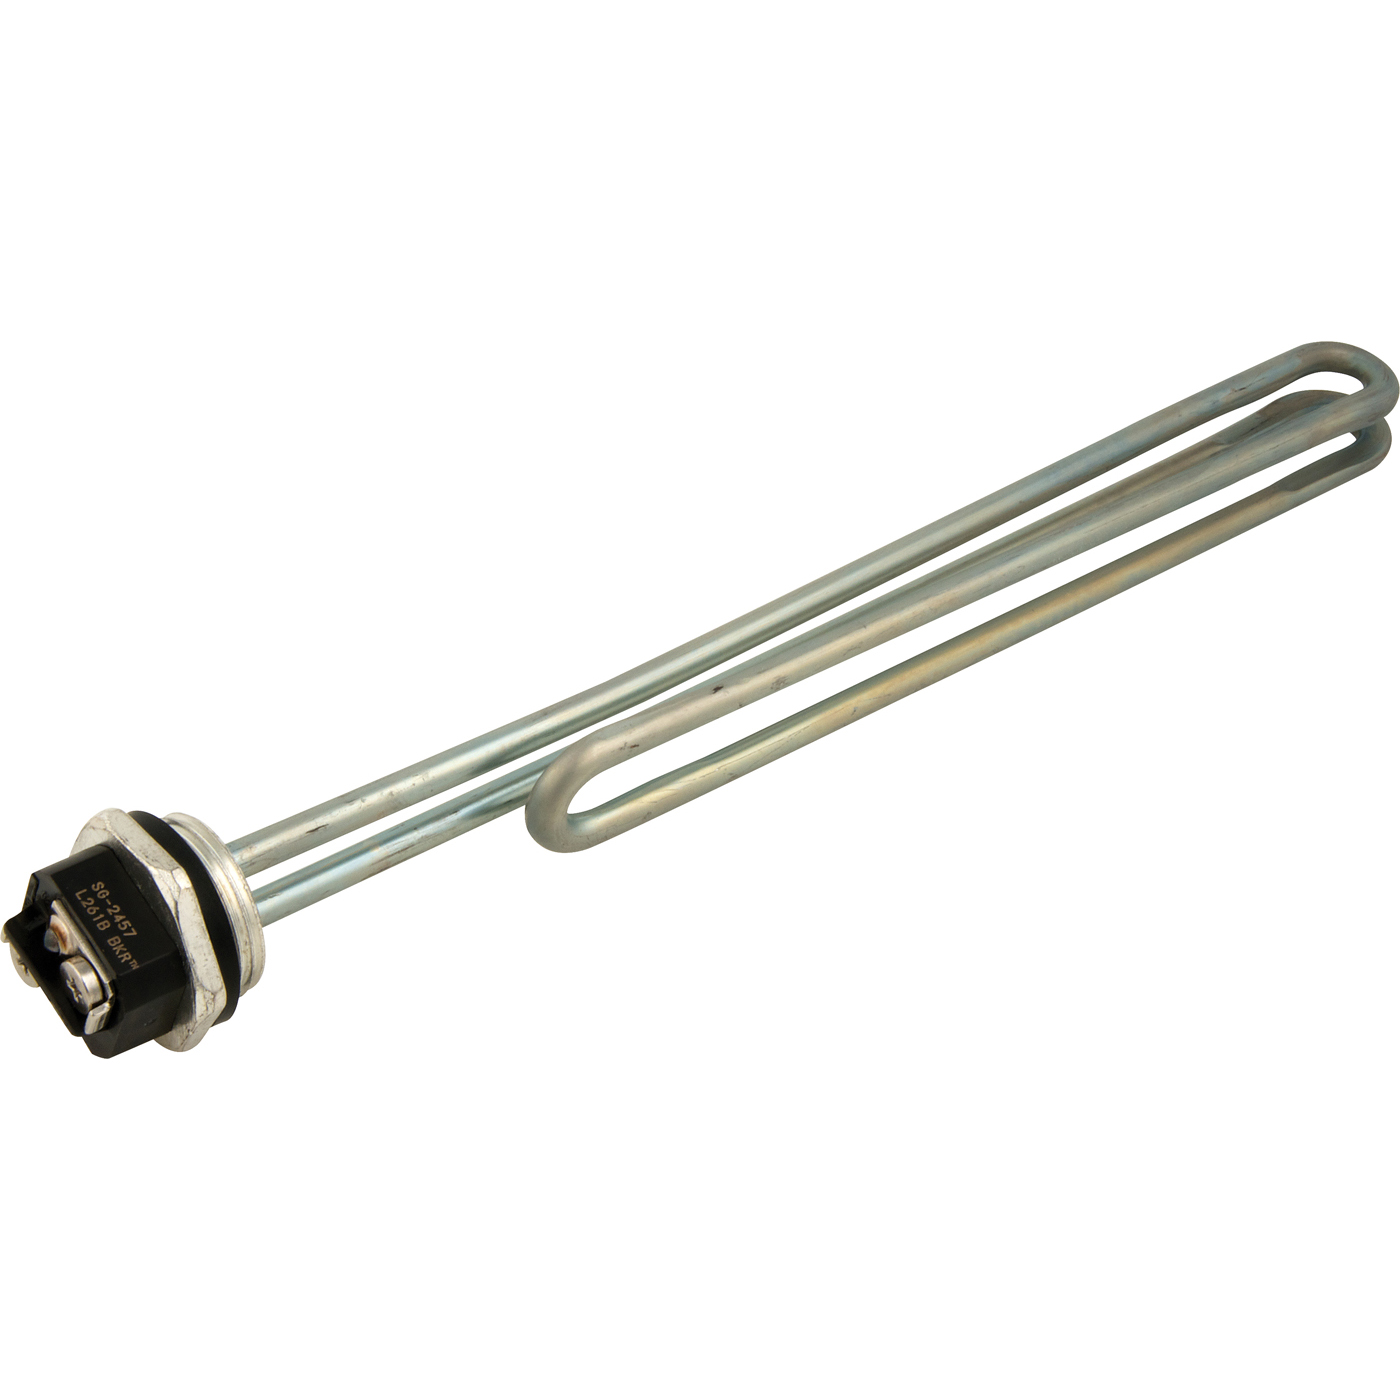 Electric water heater element, 240V/4500W - Master Plumber®